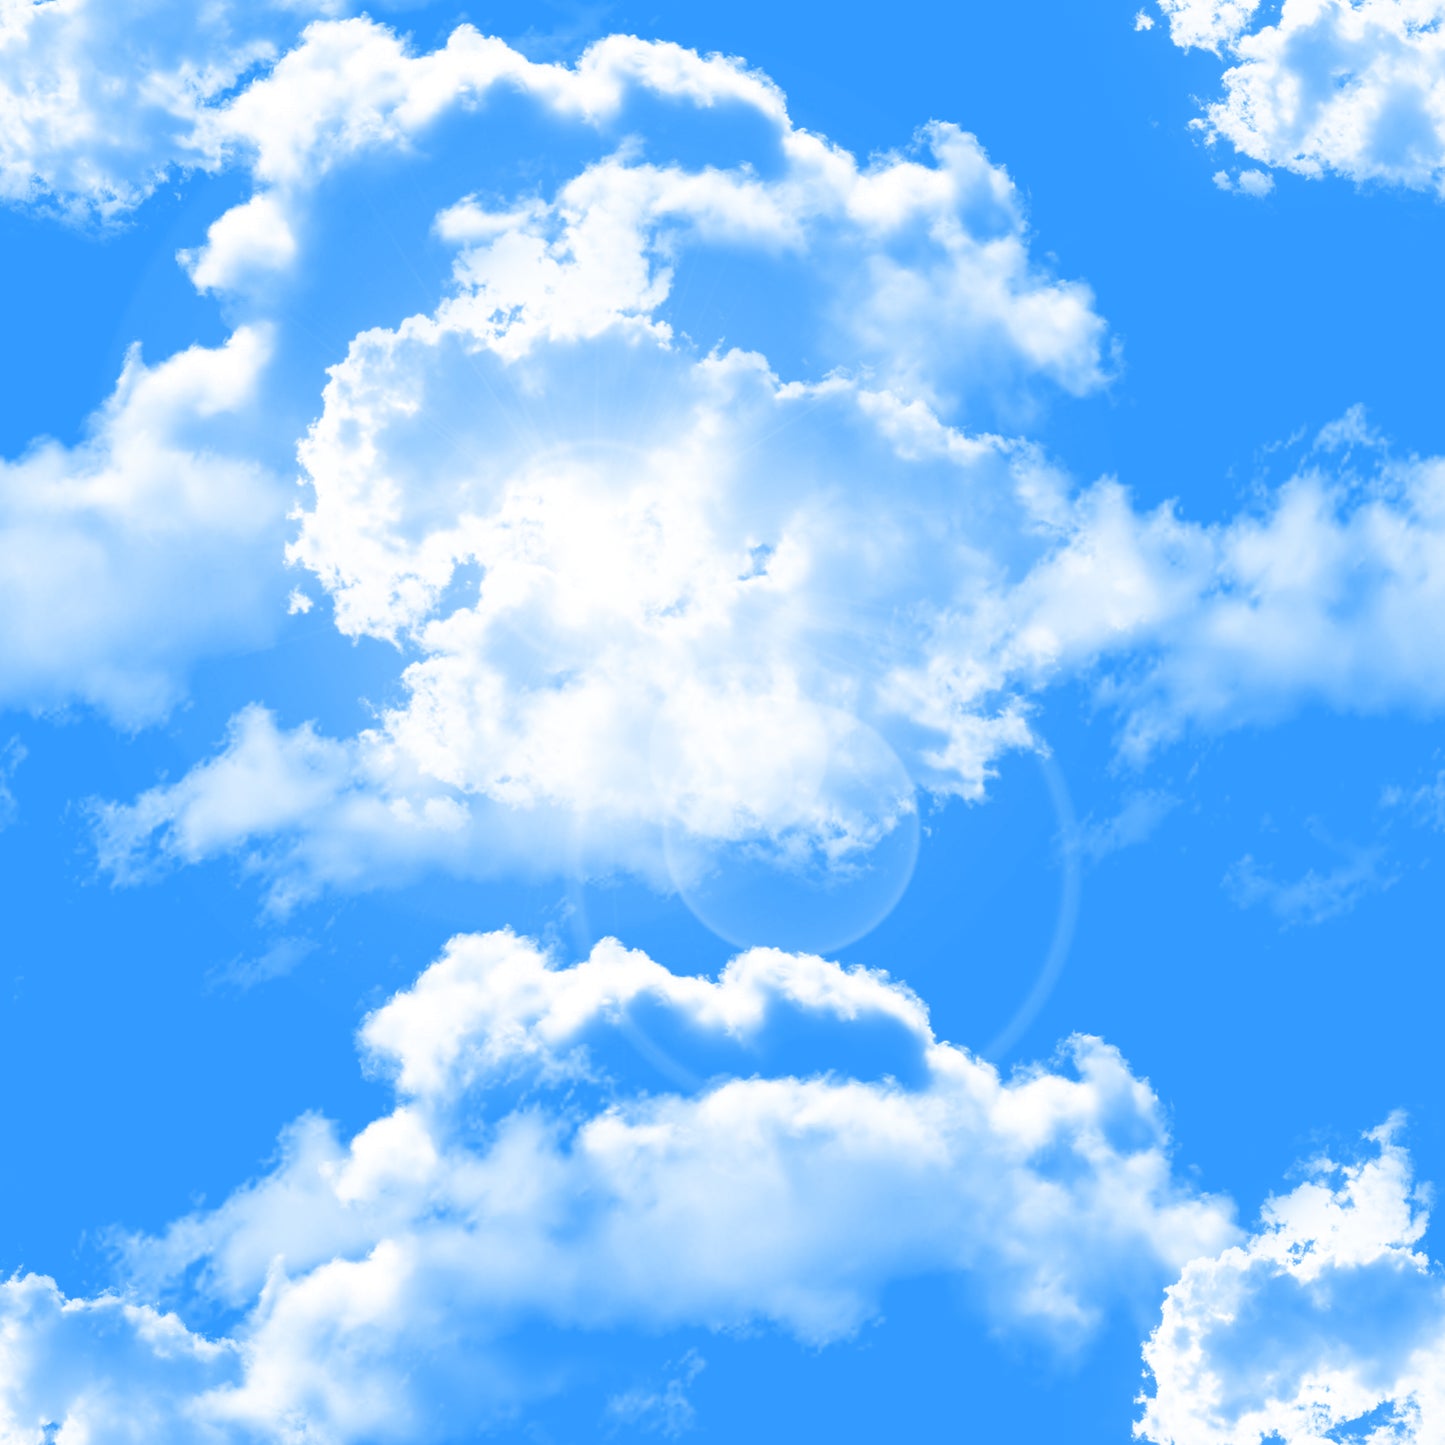 Summer Skies - Blue Sky and Clouds 009